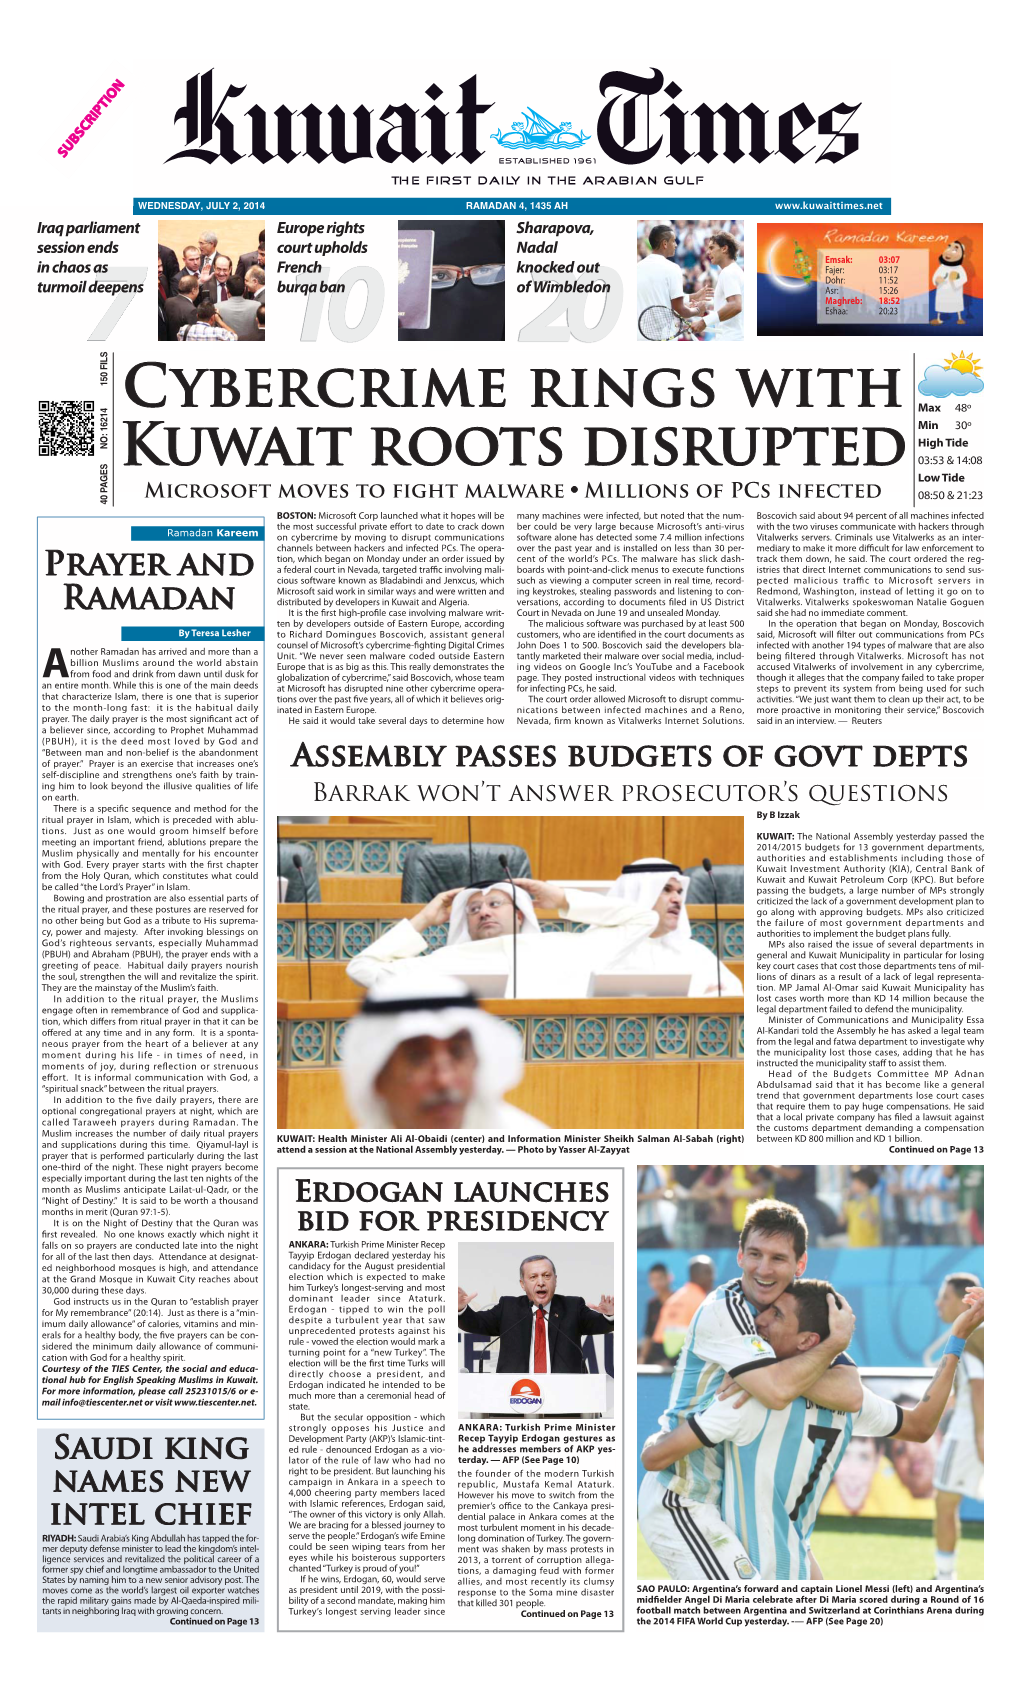 Cybercrime Rings with Kuwait Roots Disrupted